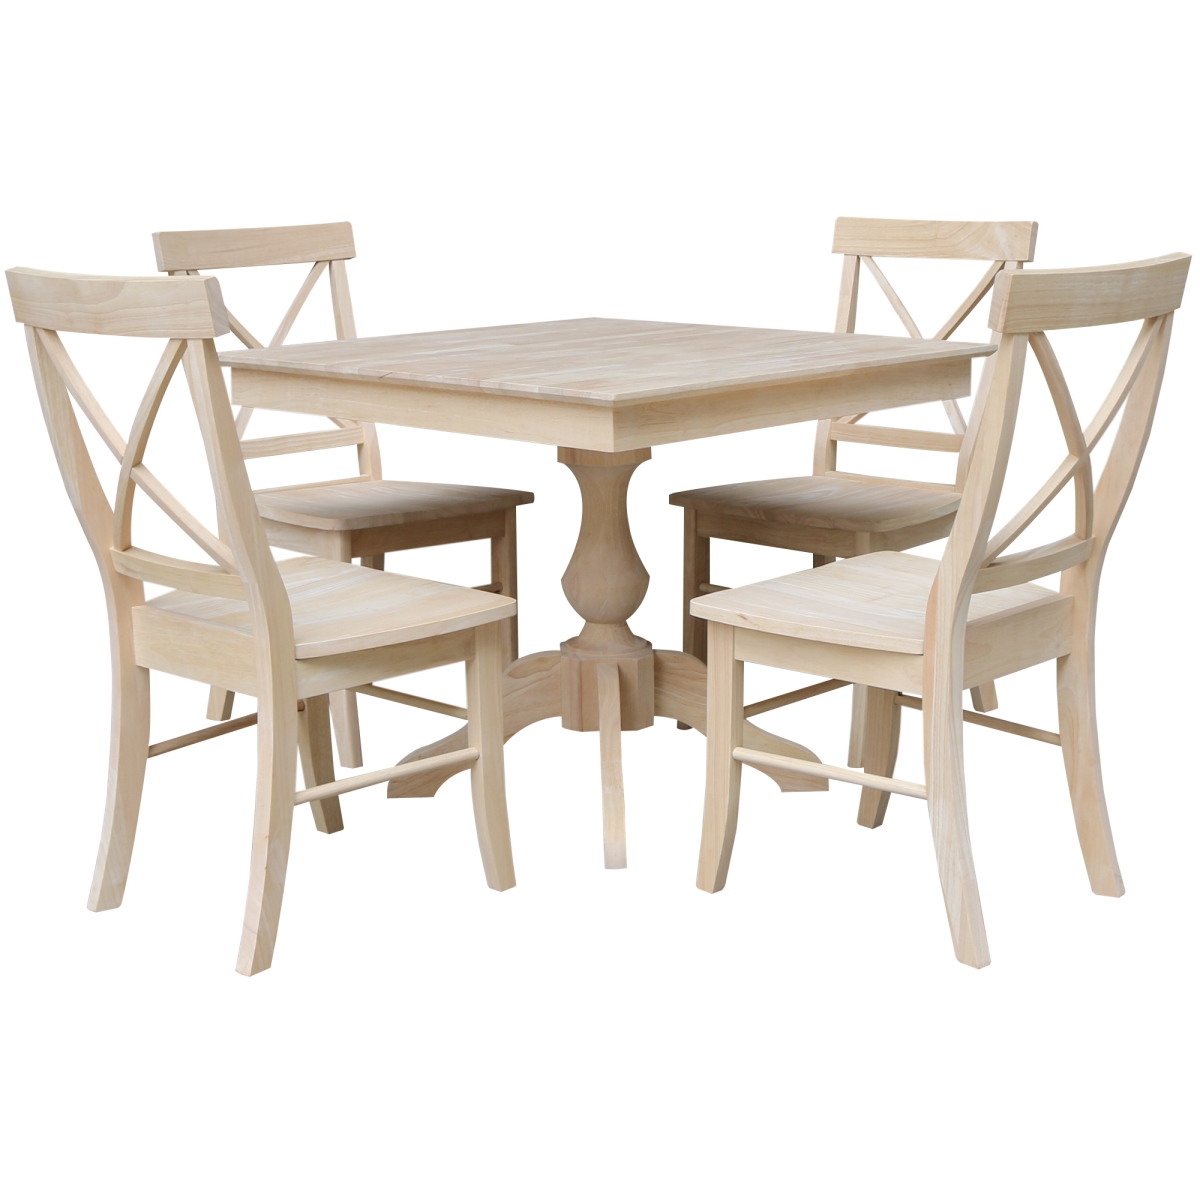 International Concepts K-3636TP-27B-C613-4 36 x 36 x 29 in. Square Top Pedestal Dining Table with 4 Chairs, Unfinished - Set of 5